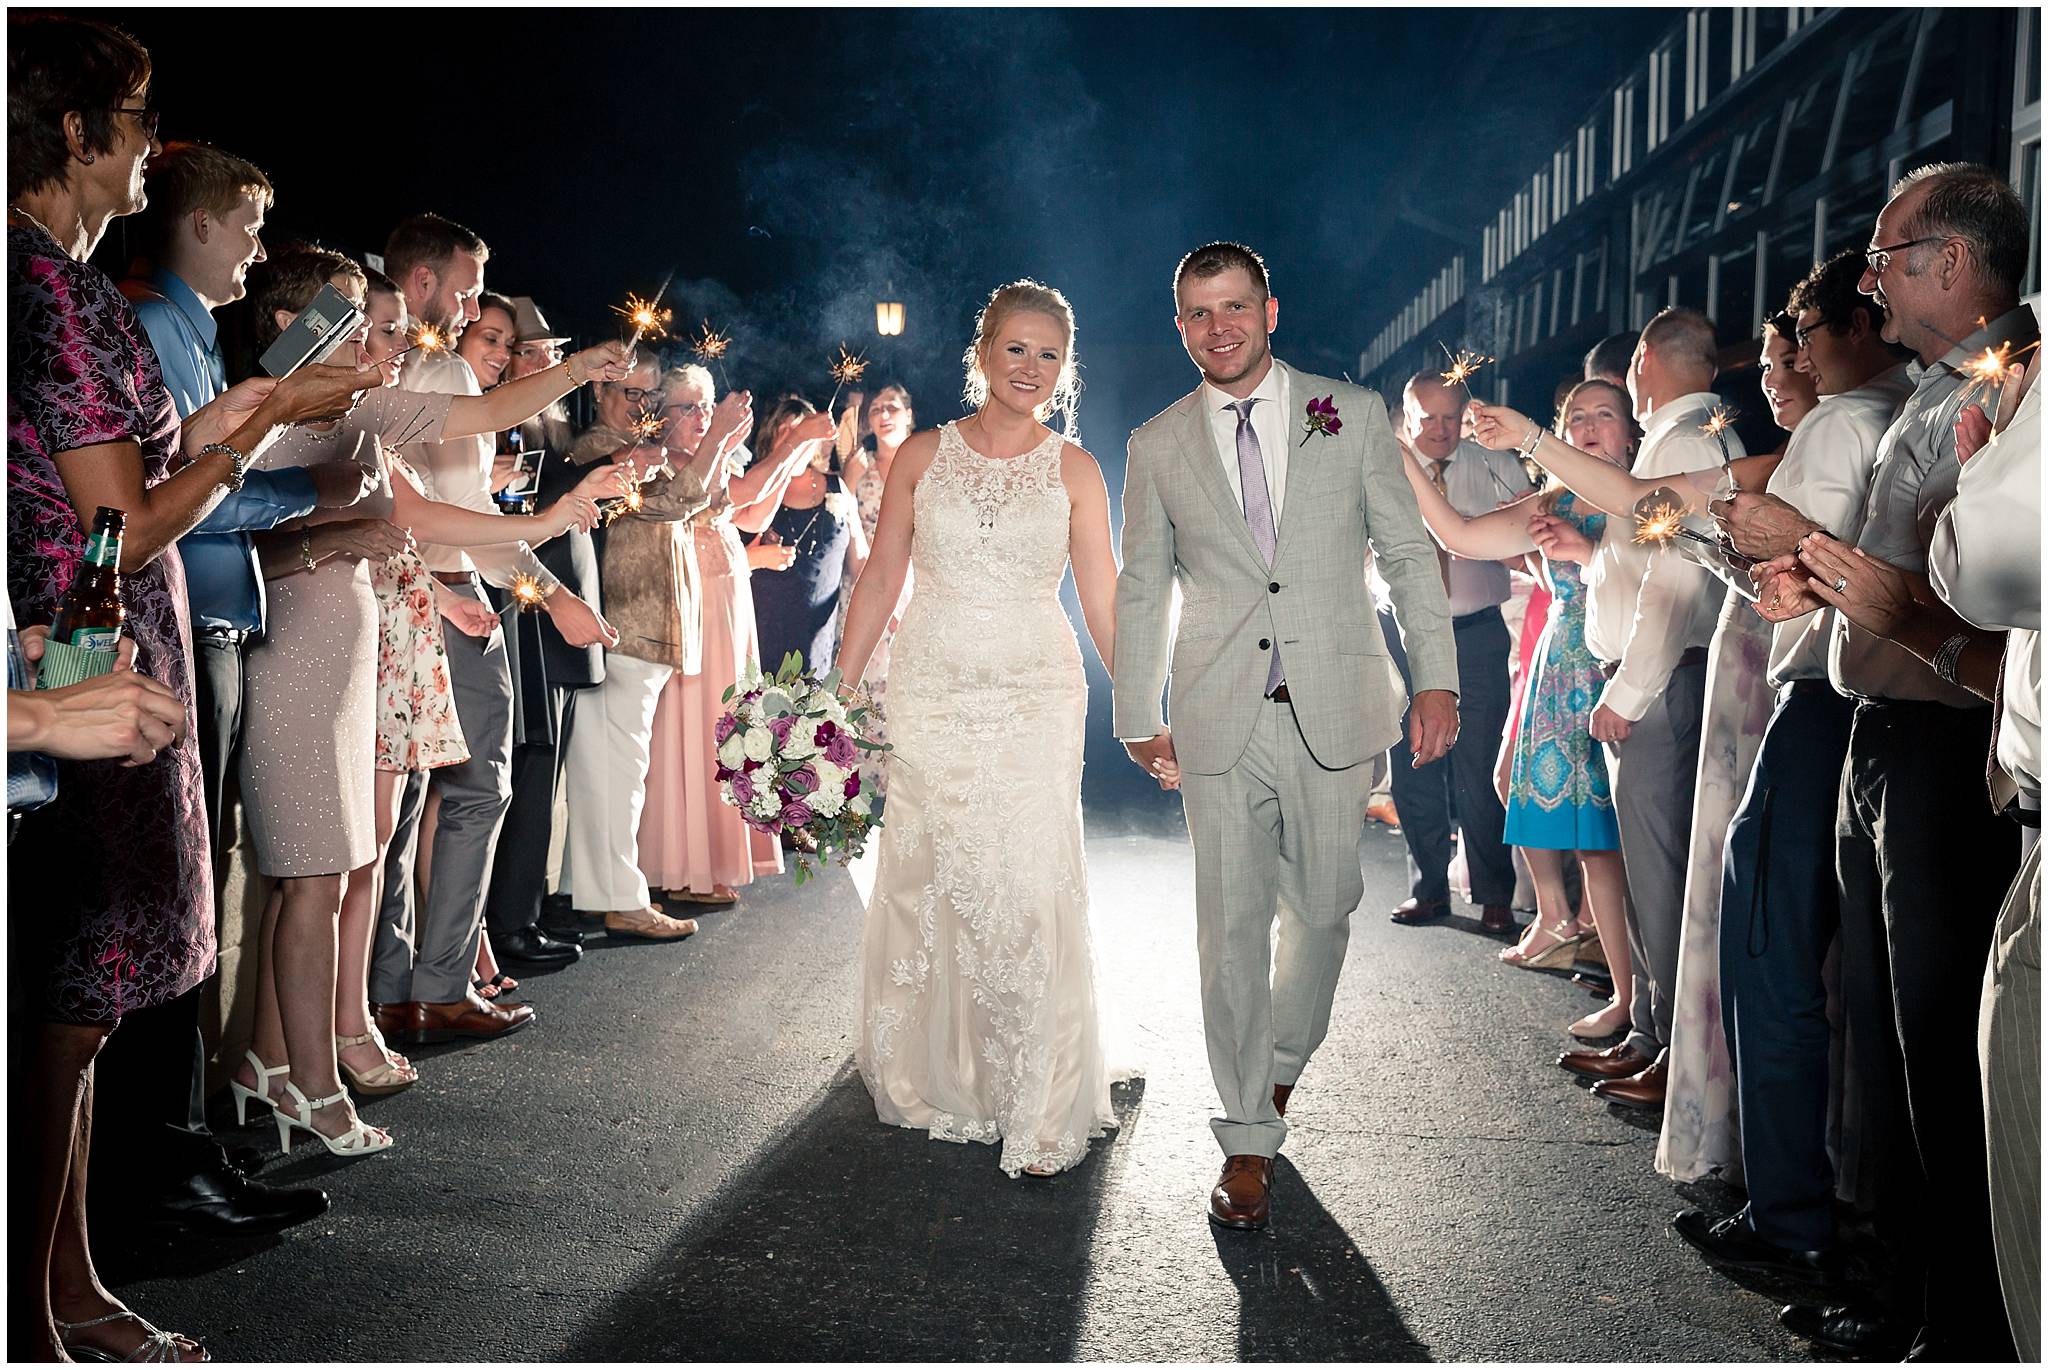 Chateau Elan Winery Resort Wedding Pictures Best wedding Sparkler Exit Pictures